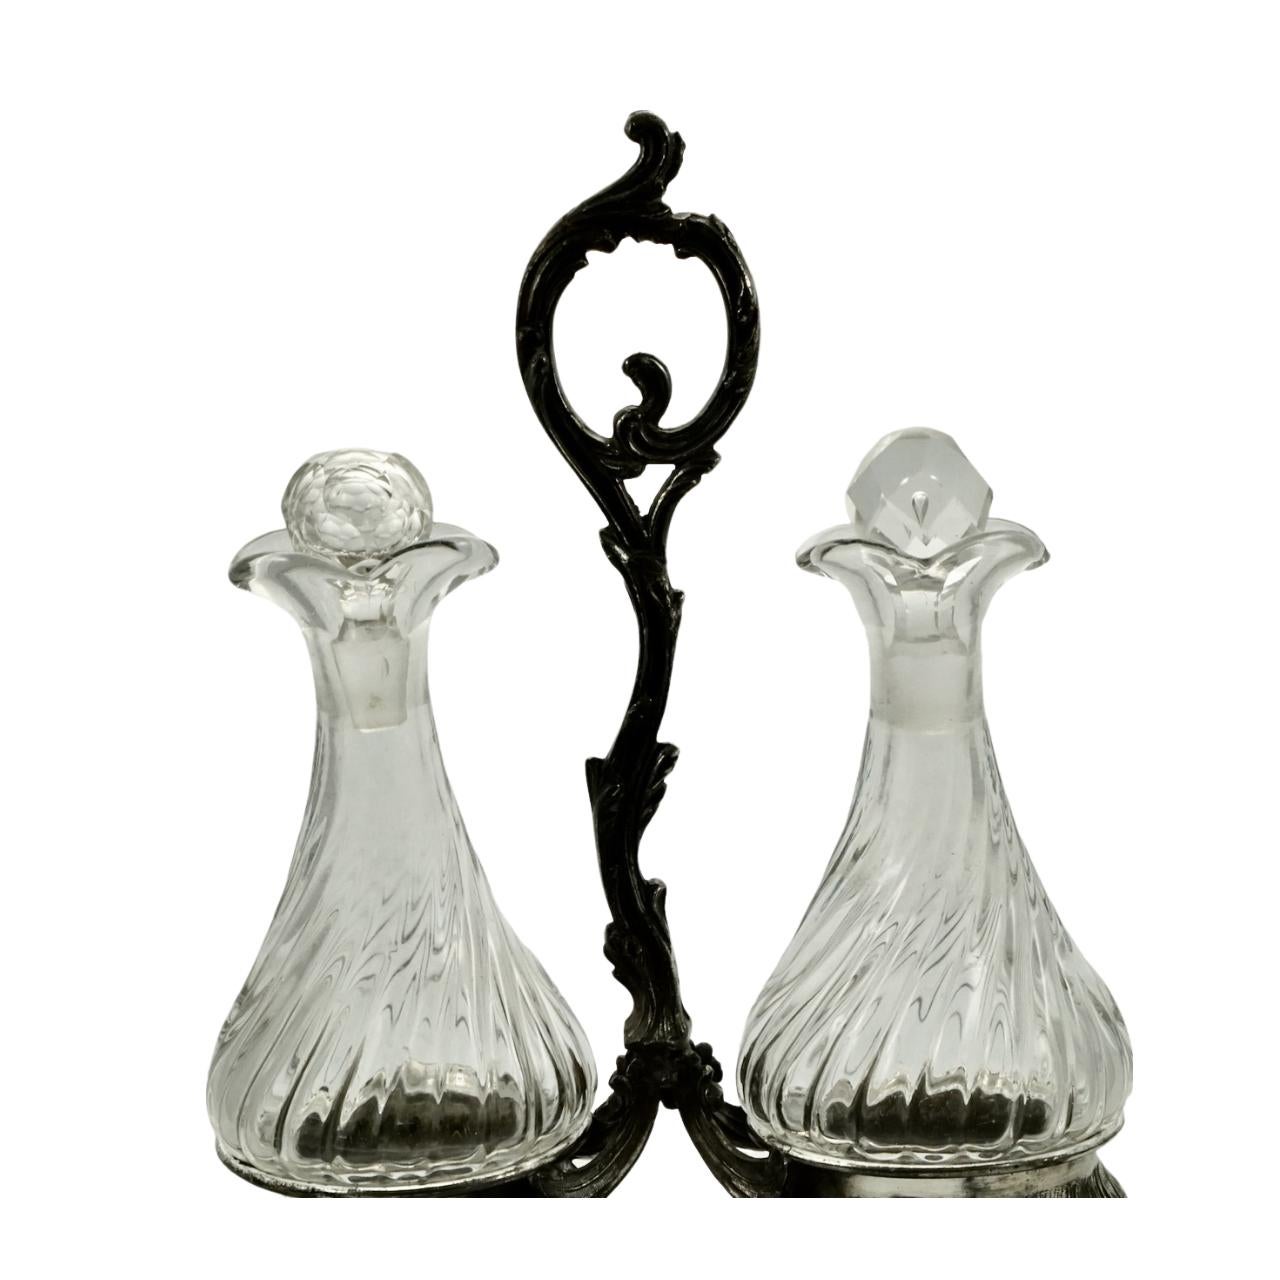 Antique French silver plated serving condiment set. There is an ornate centre handle with two engraved condiment holders standing on feet. The glass bottles are shaped to fit the holders. Measuring width 16.5cm / 6.5 inches, height 24.8 cm / 9.7